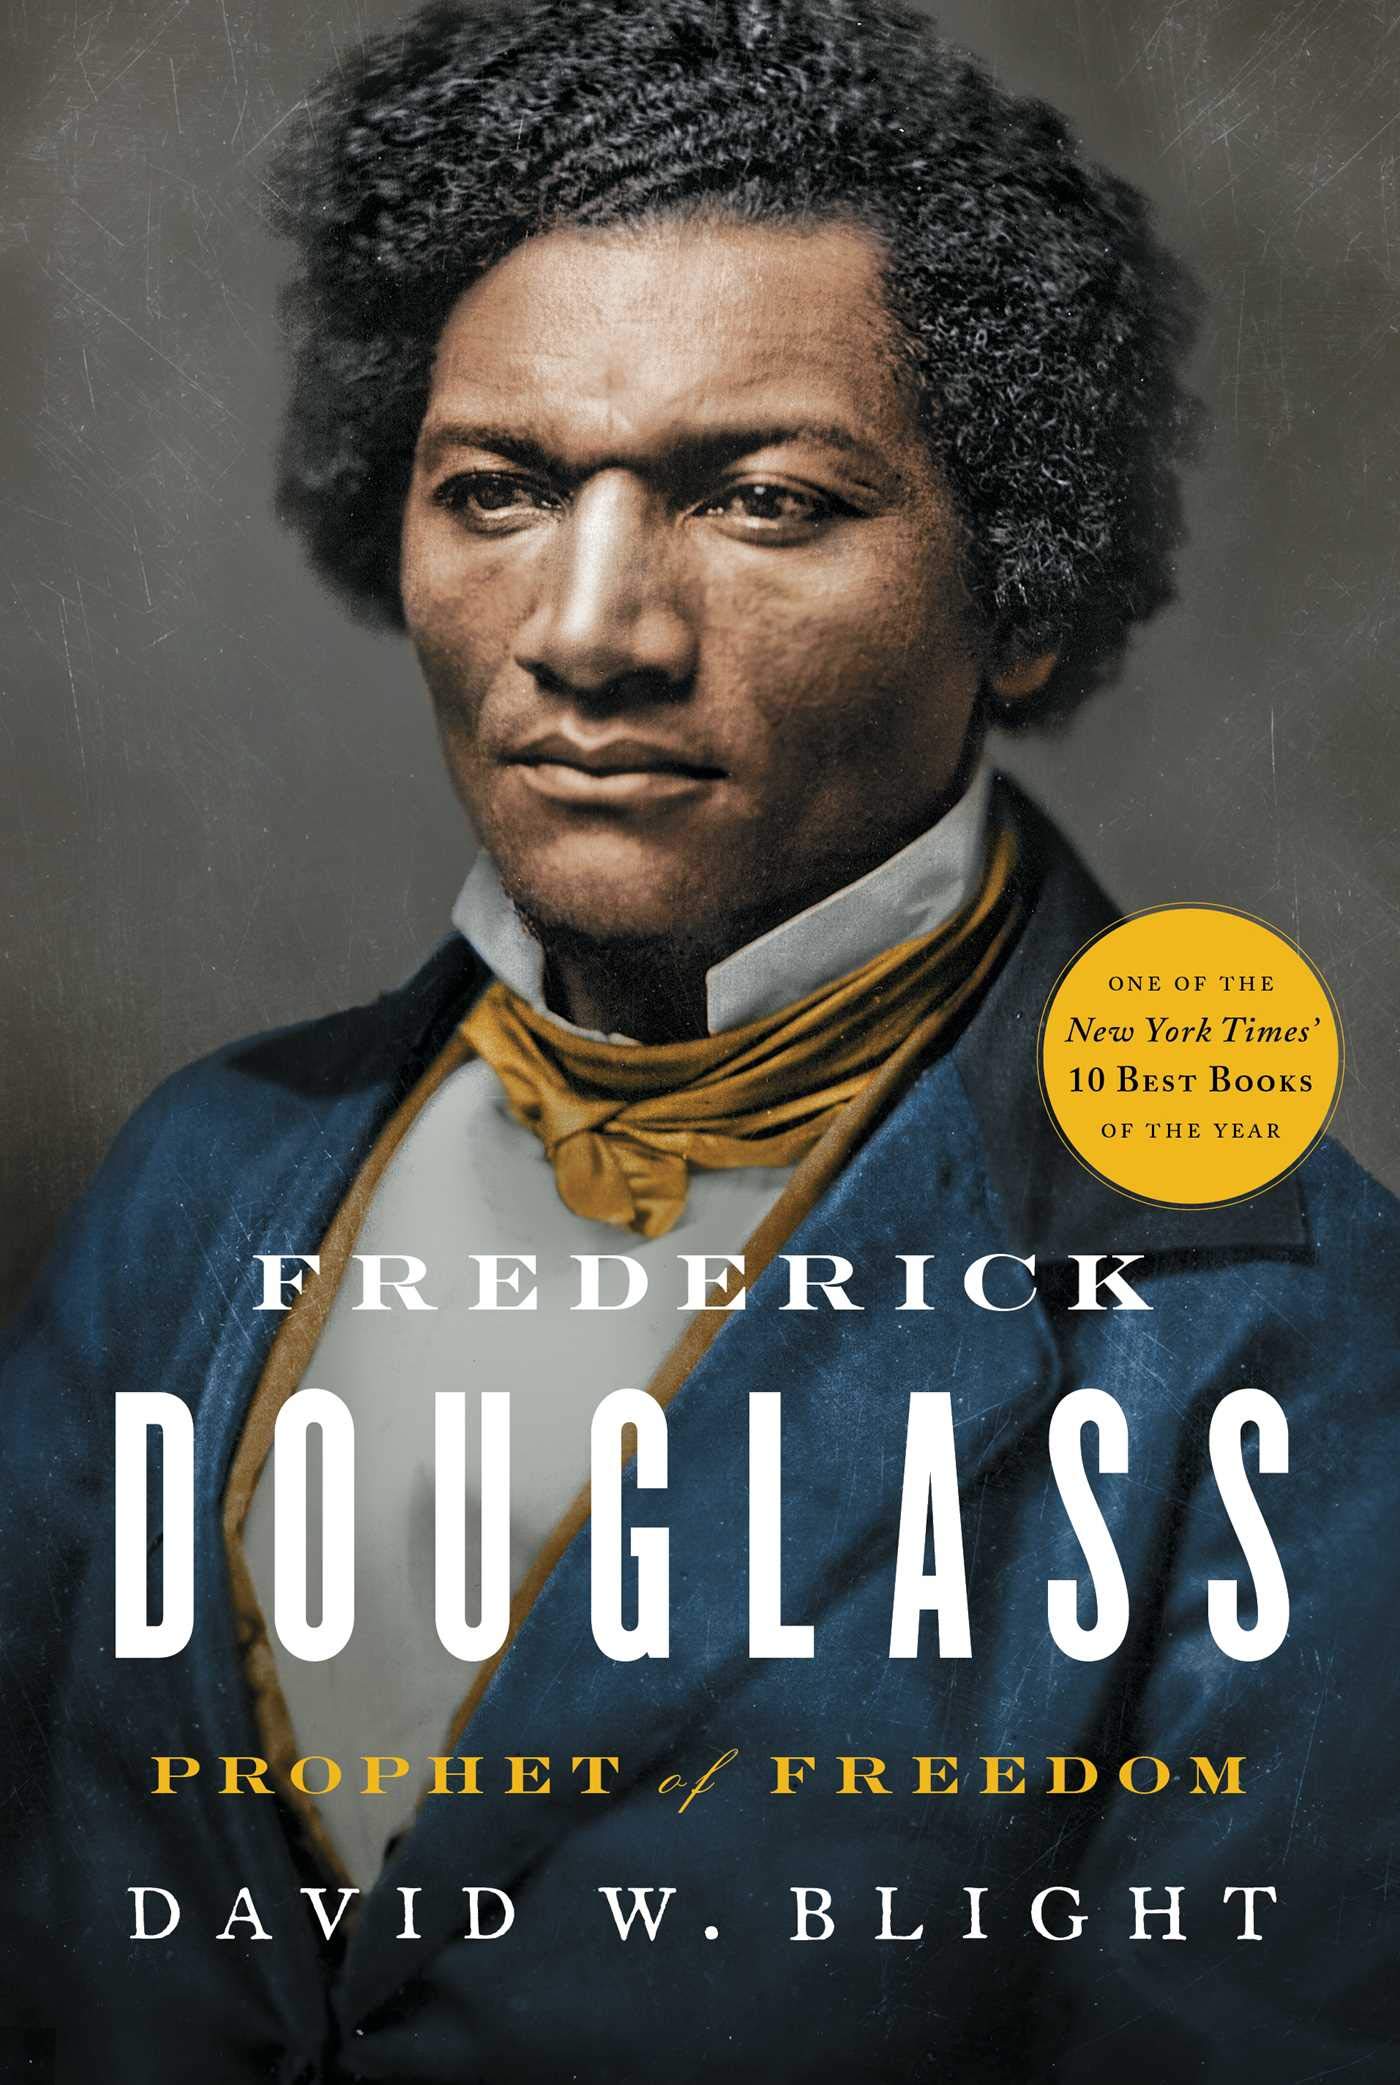 A book cover for Frederick Douglass: Prophet of Freedom